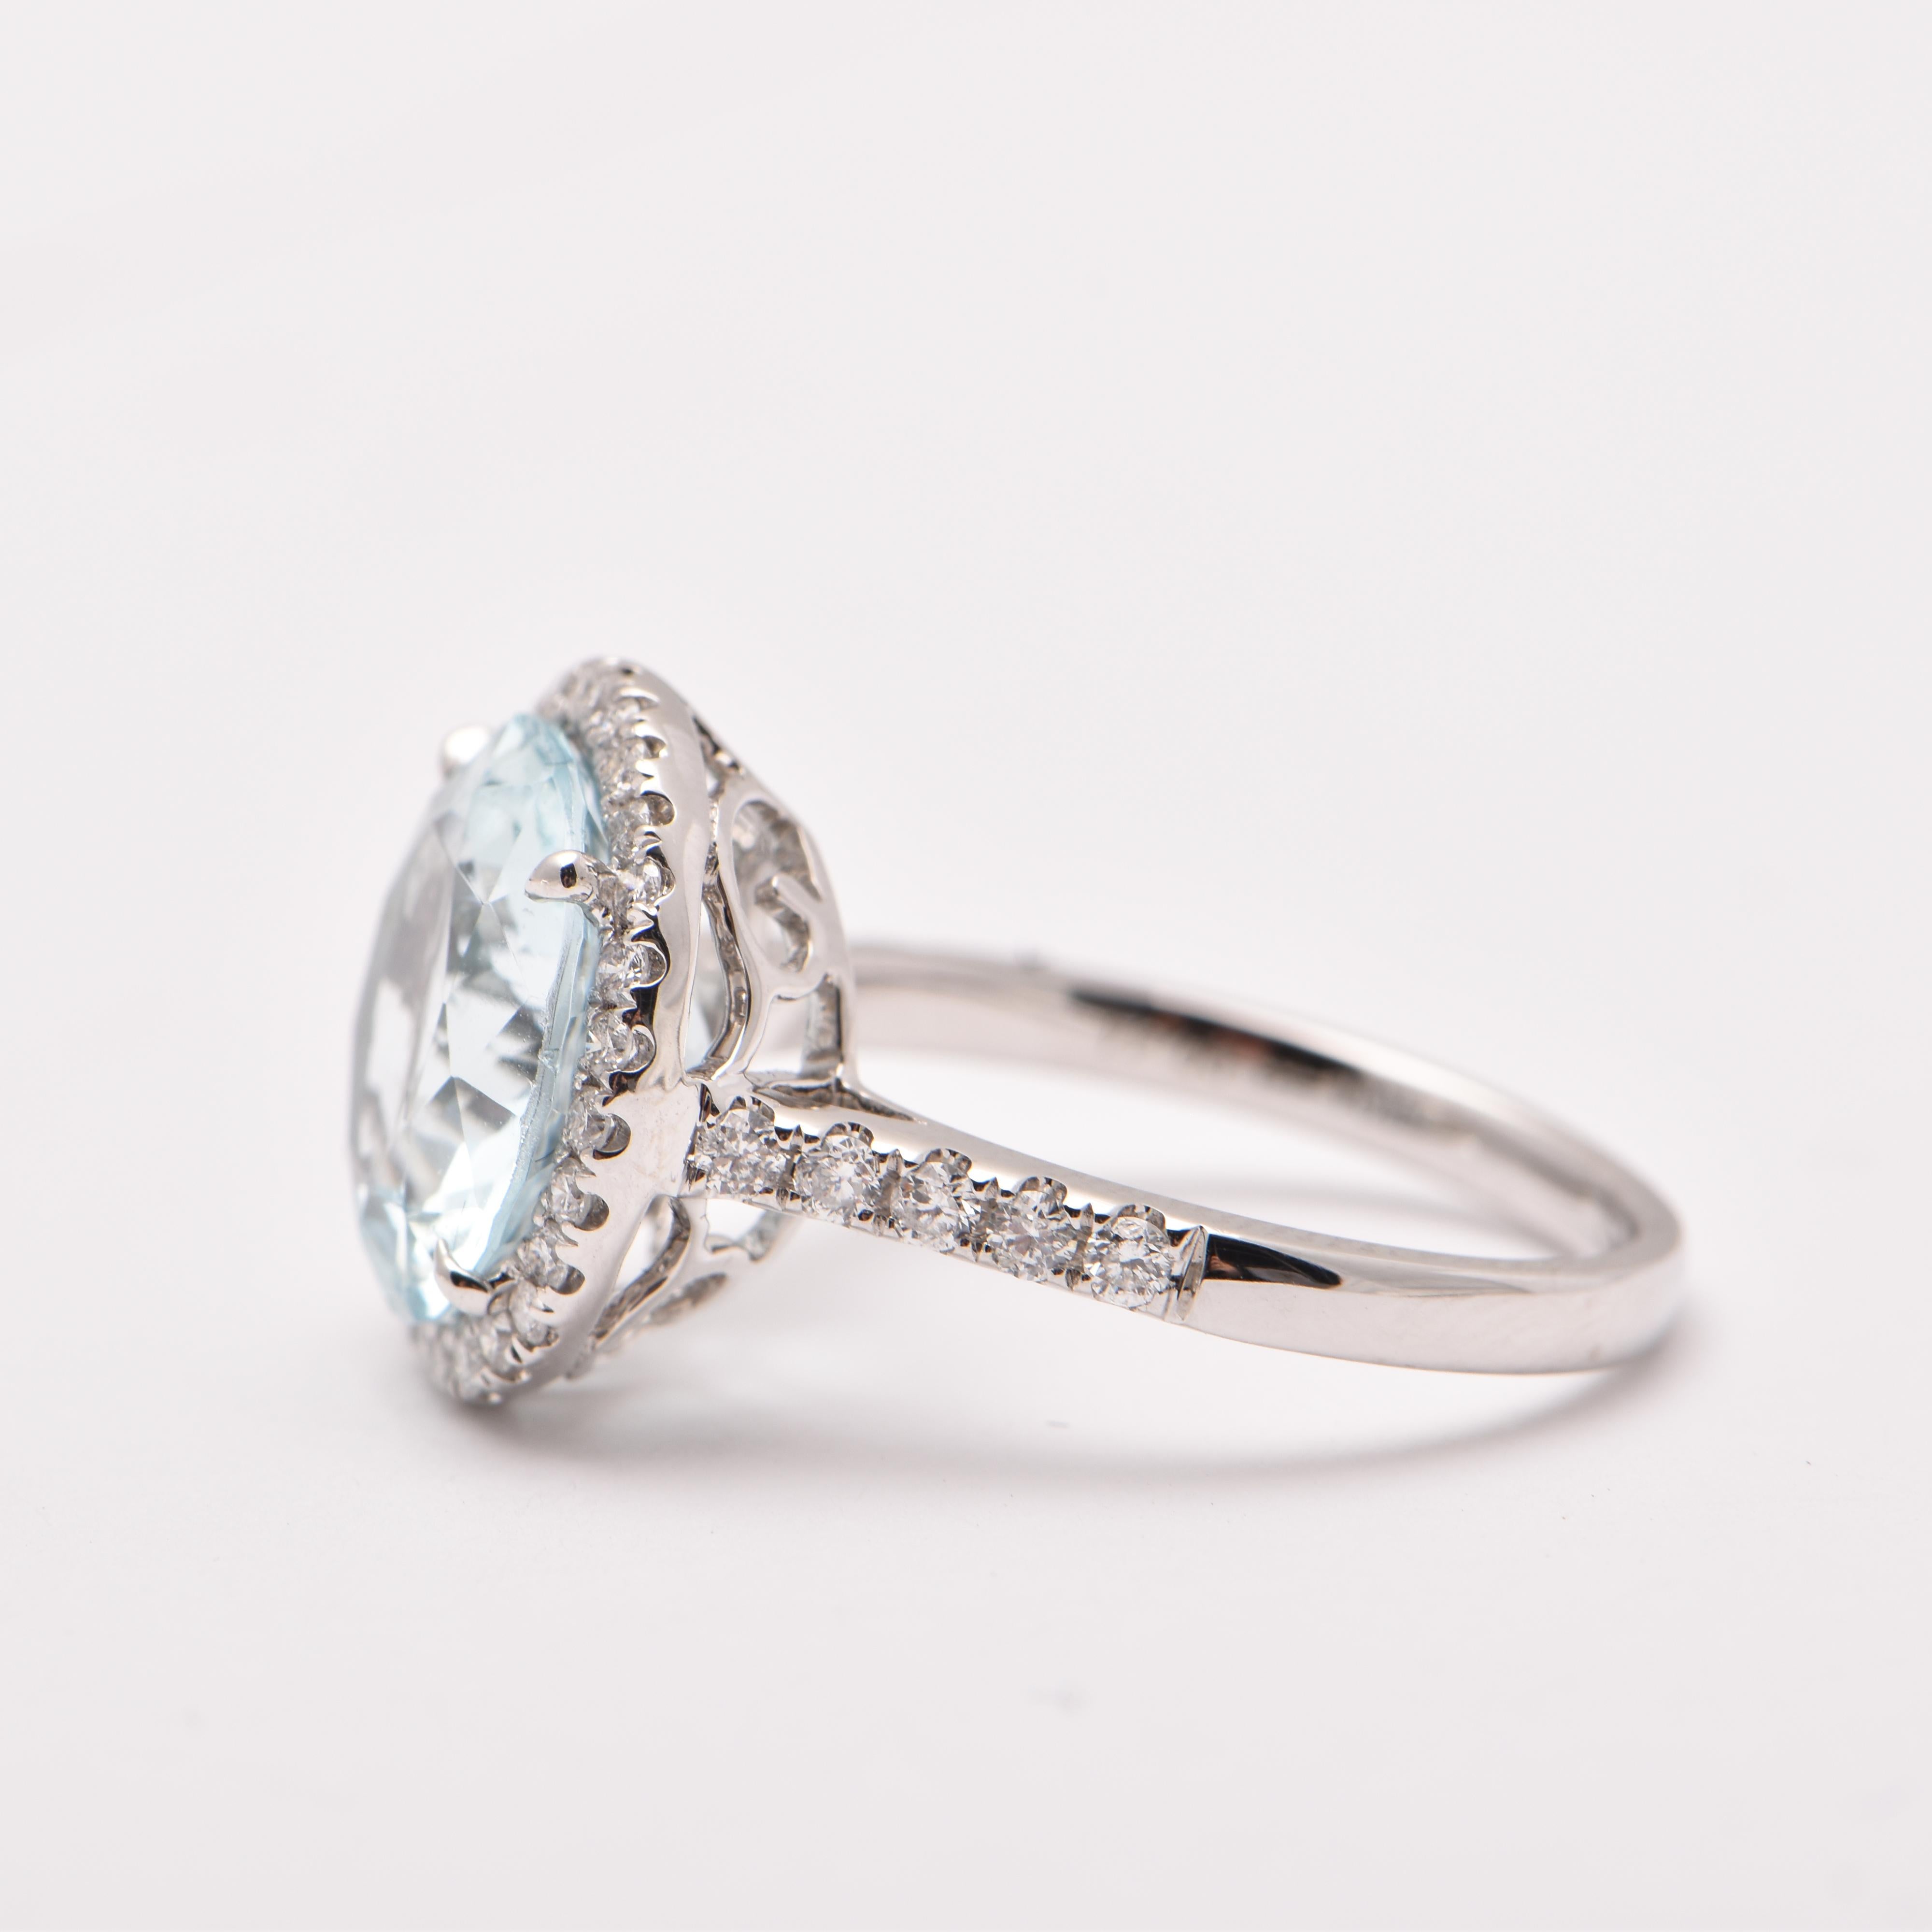 4.19 Carat Aquamarine and Diamond Ring in 18 Carat White Gold In New Condition For Sale In Sydney, AU